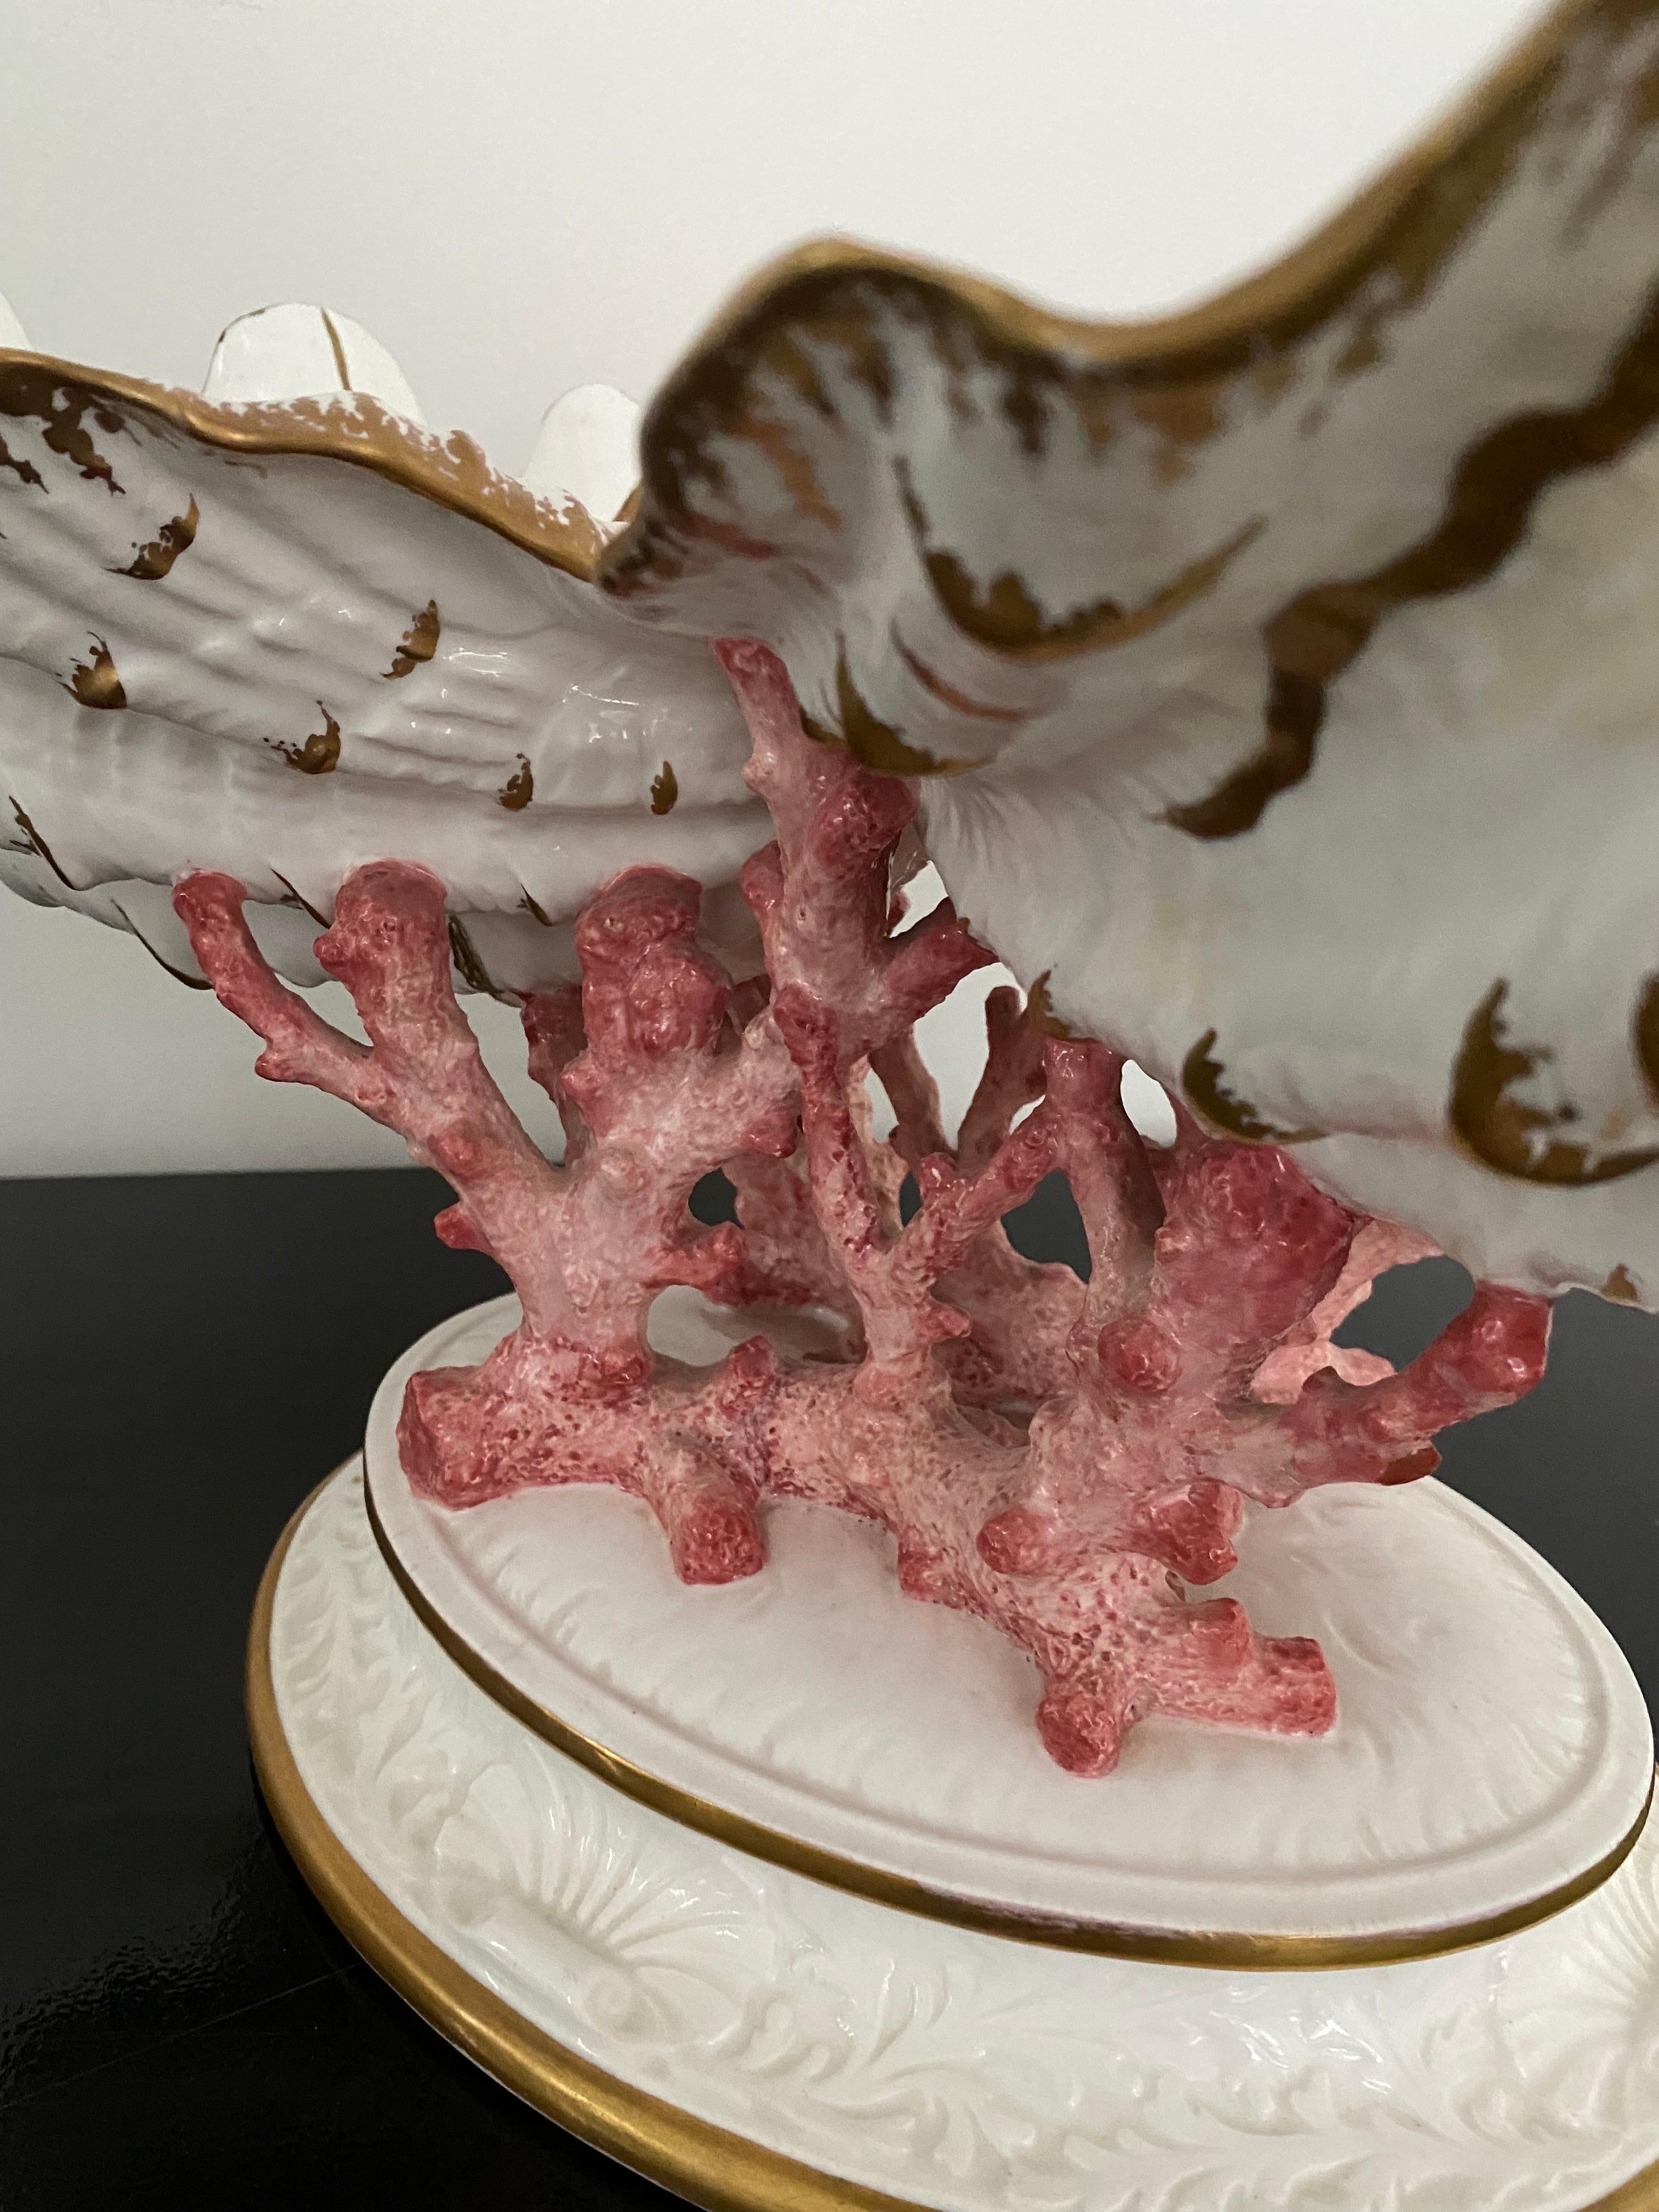 Rare Wedgwood Coral and Clamshells Decorative Pedestal Table Centerpiece Dish 5